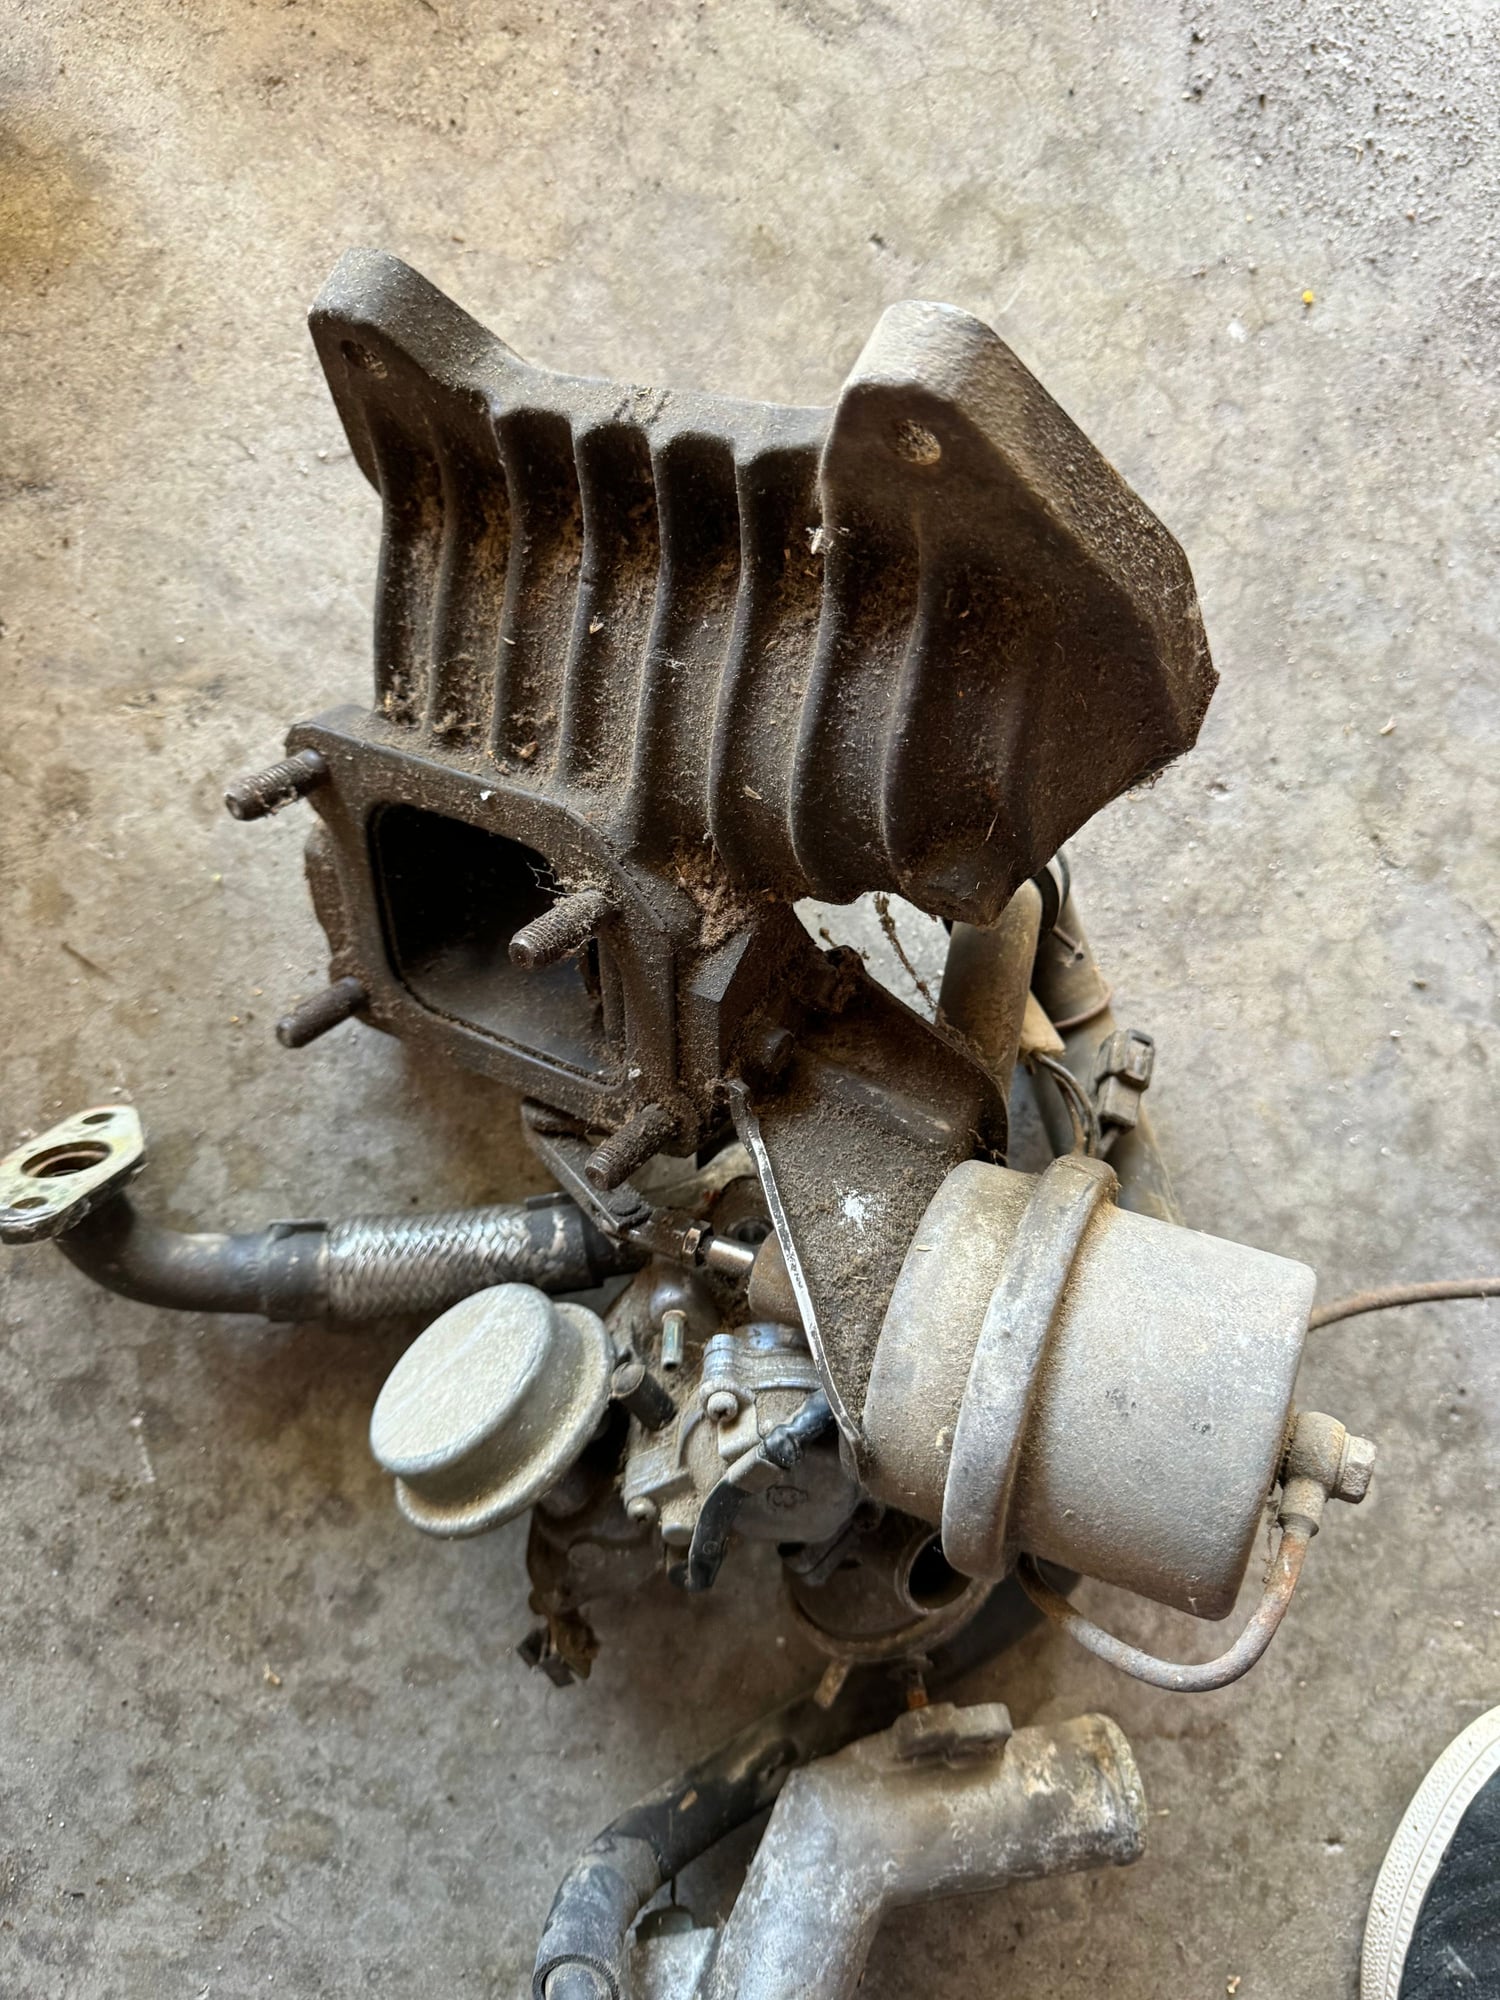 Engine - Intake/Fuel - S4 turbo parts - Used - 1987 to 1991 Mazda RX-7 - Saint Louis, MO 63034, United States